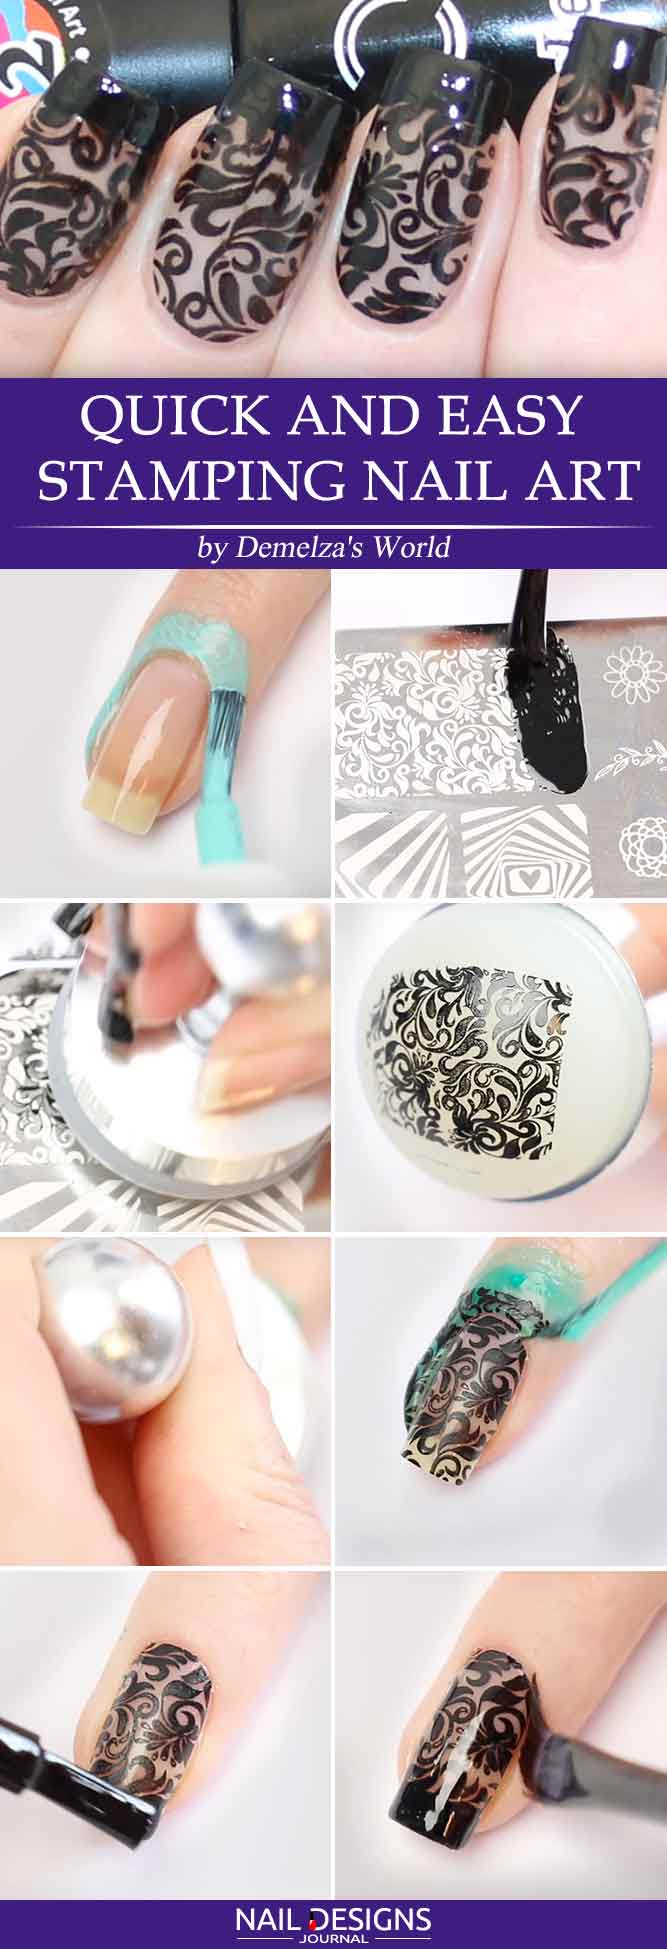 Quick and Easy Stamping Nail Art